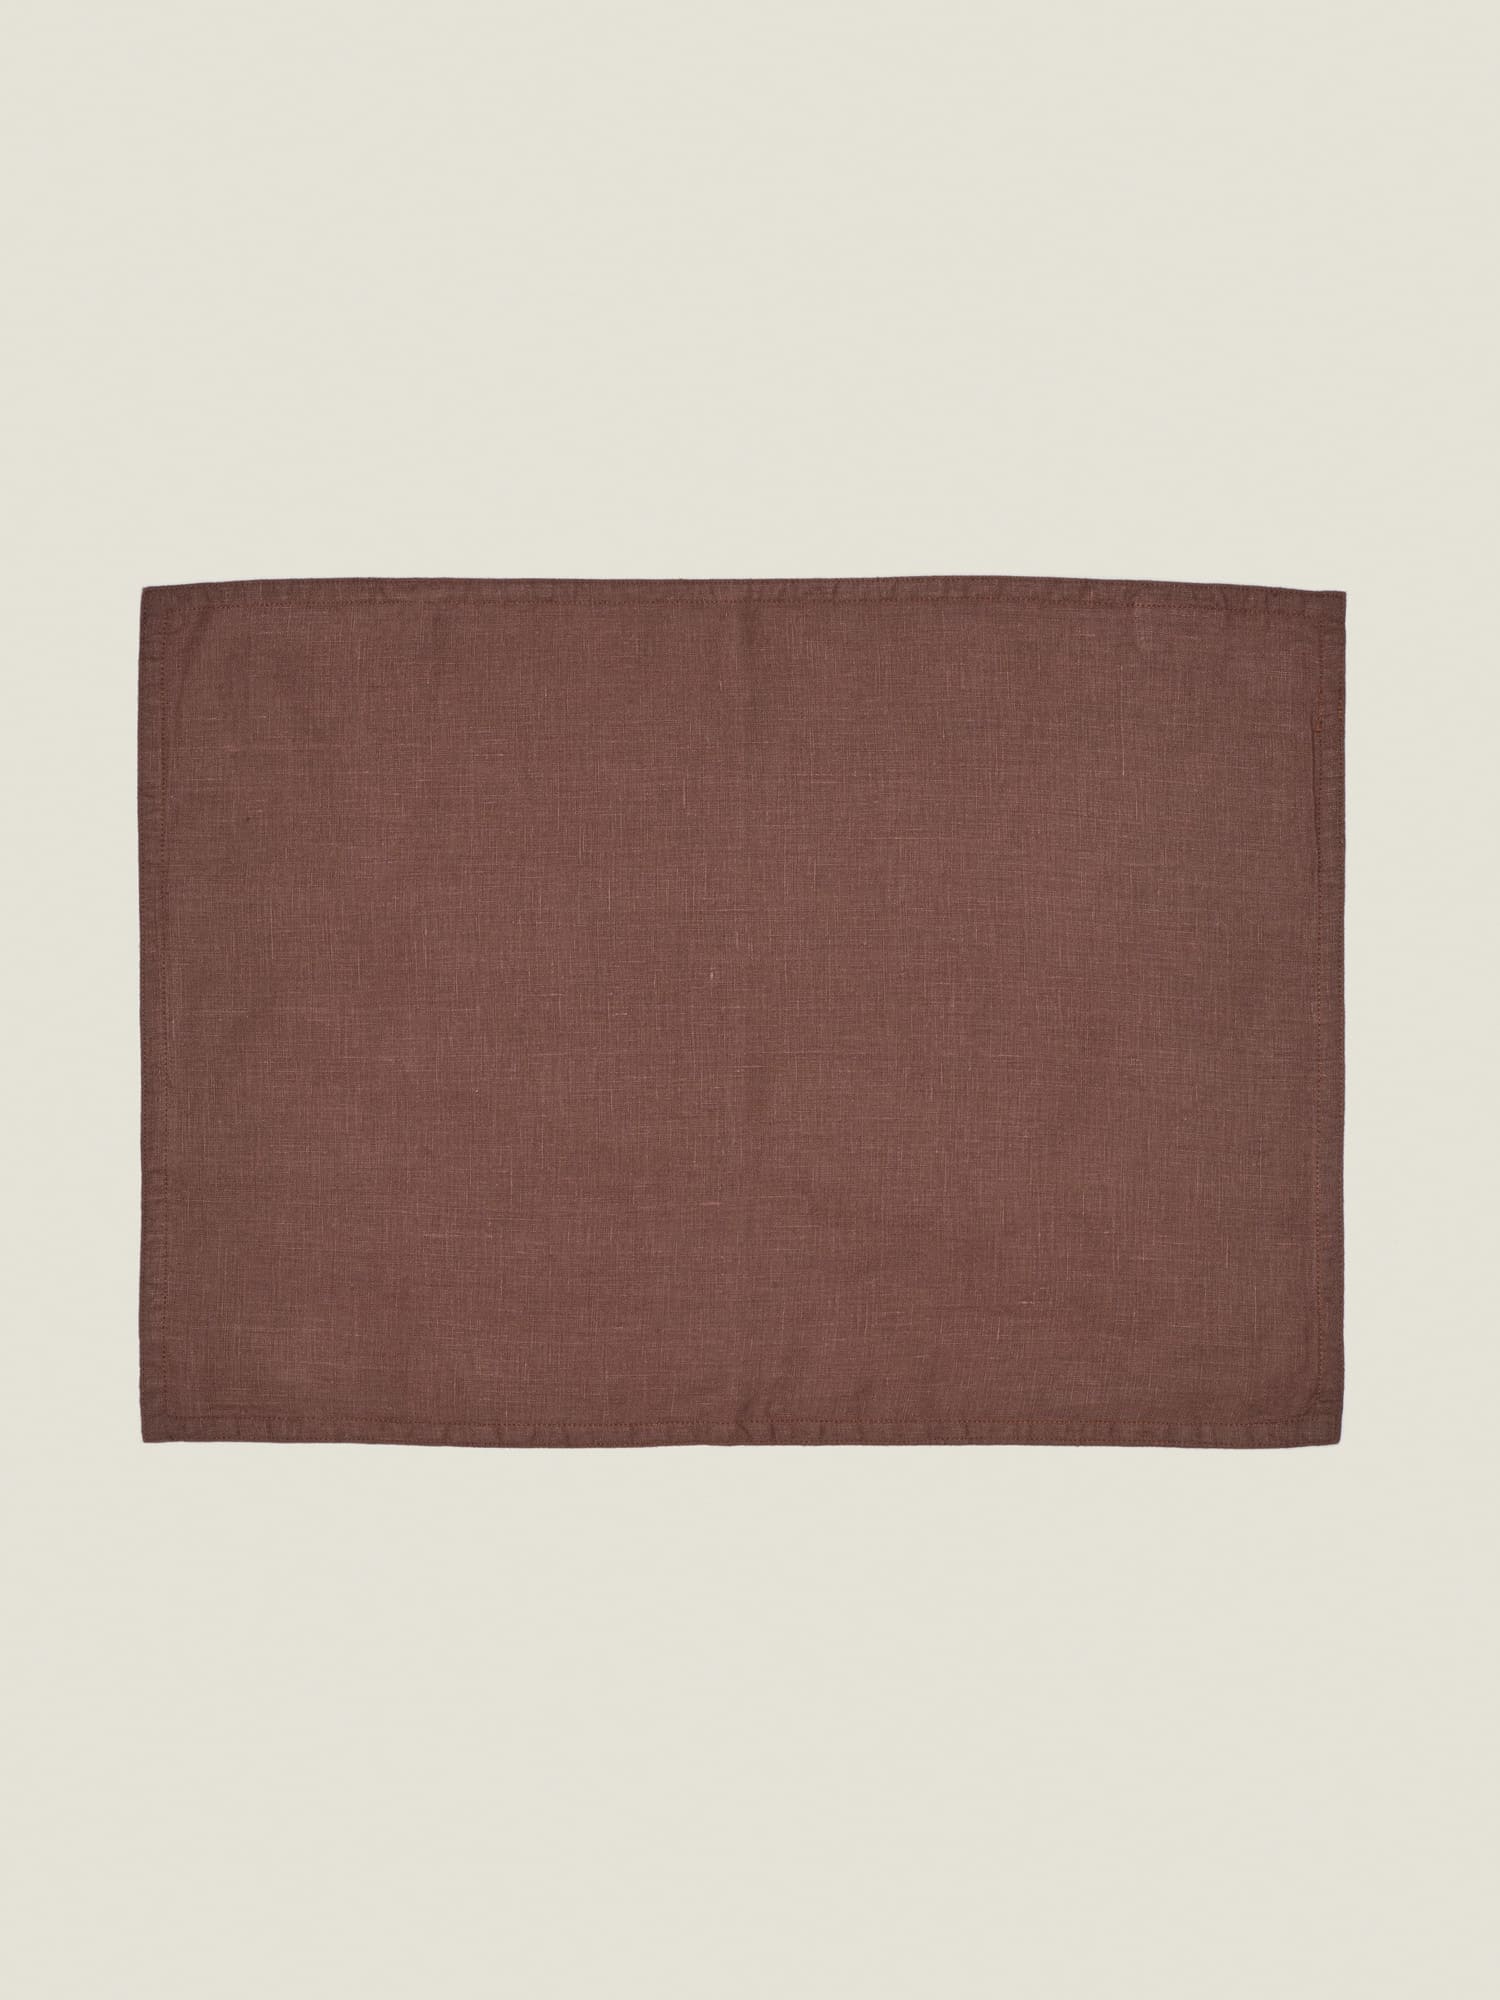 100% linen placemat set (4 units) in Chocolate